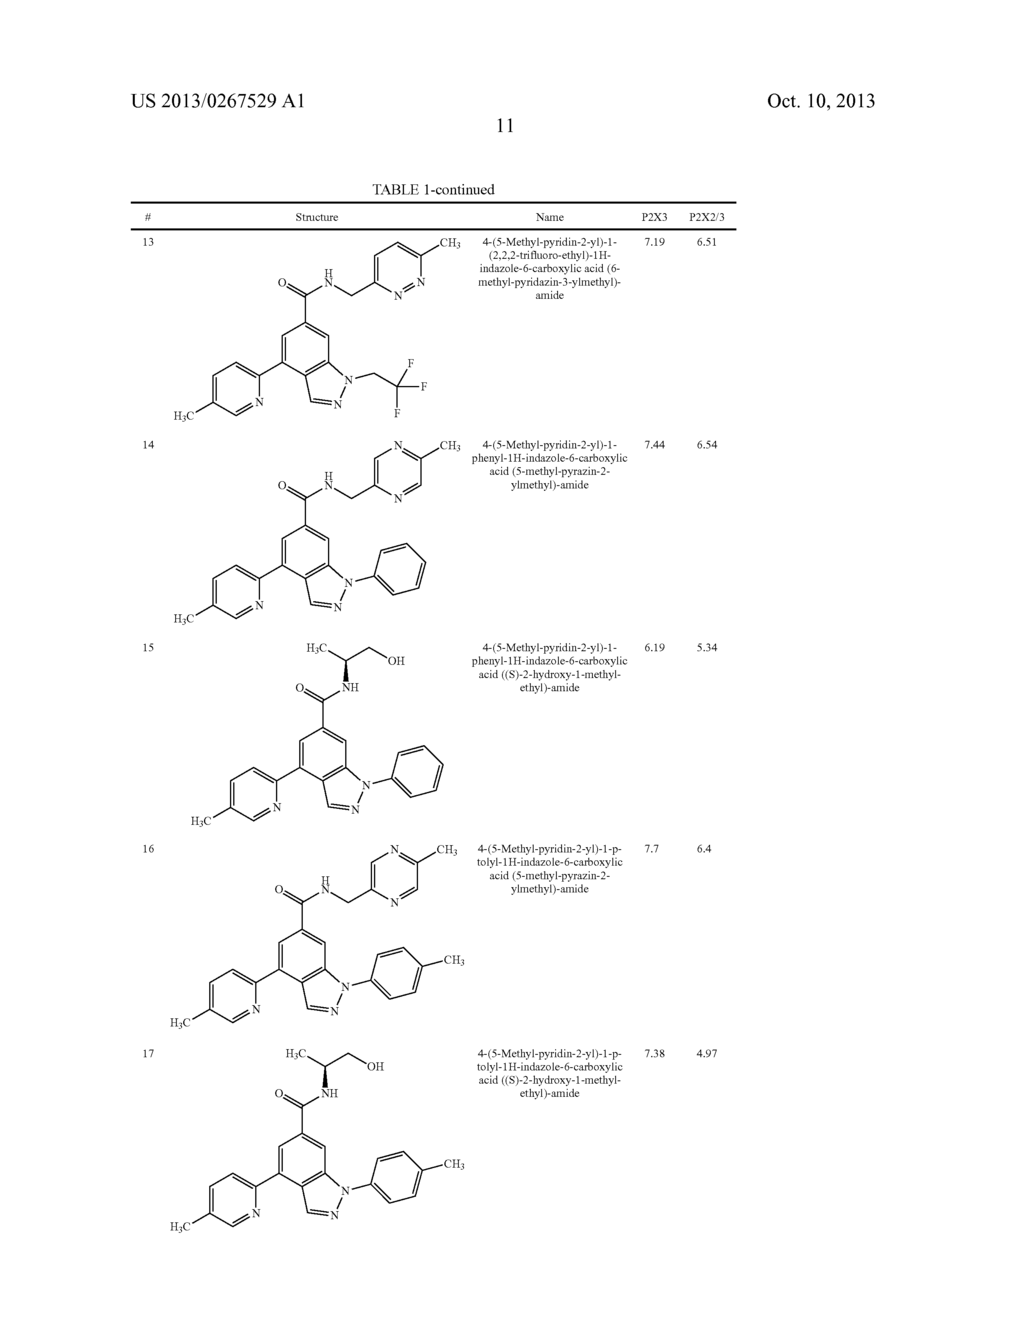 INDOLE, INDAZOLE AND BENZIMIDAZOLE ARYLAMIDES AS P2X3 AND P2X2/3     ANTAGONISTS - diagram, schematic, and image 12